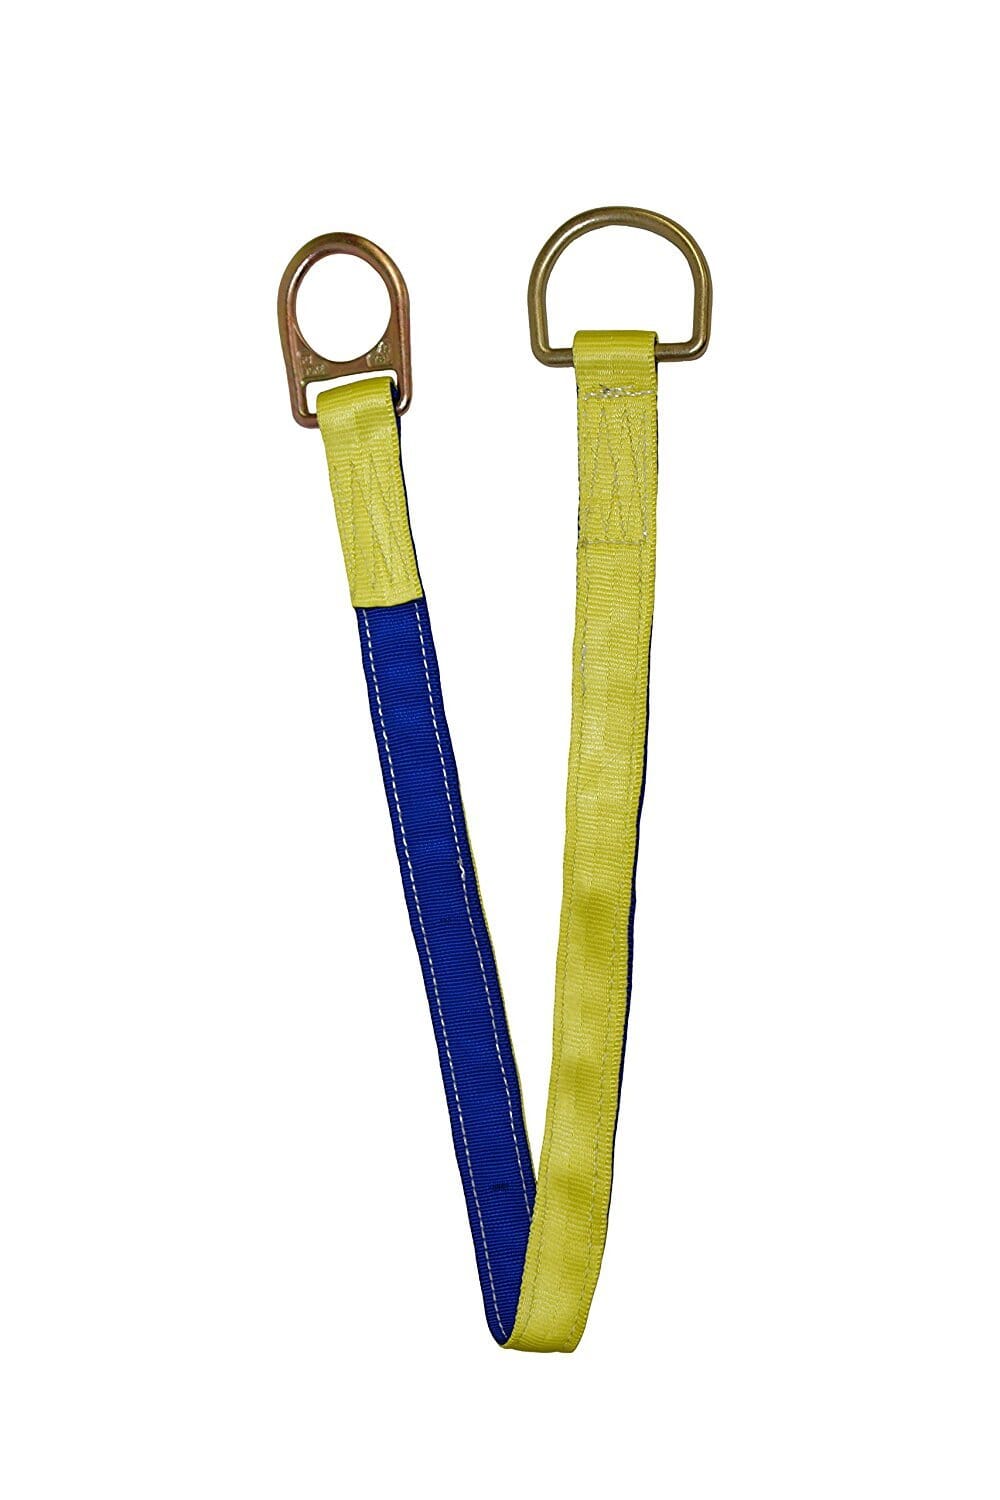 Elk River EZE-Man Sling 6' Fall Protection Device - 26776